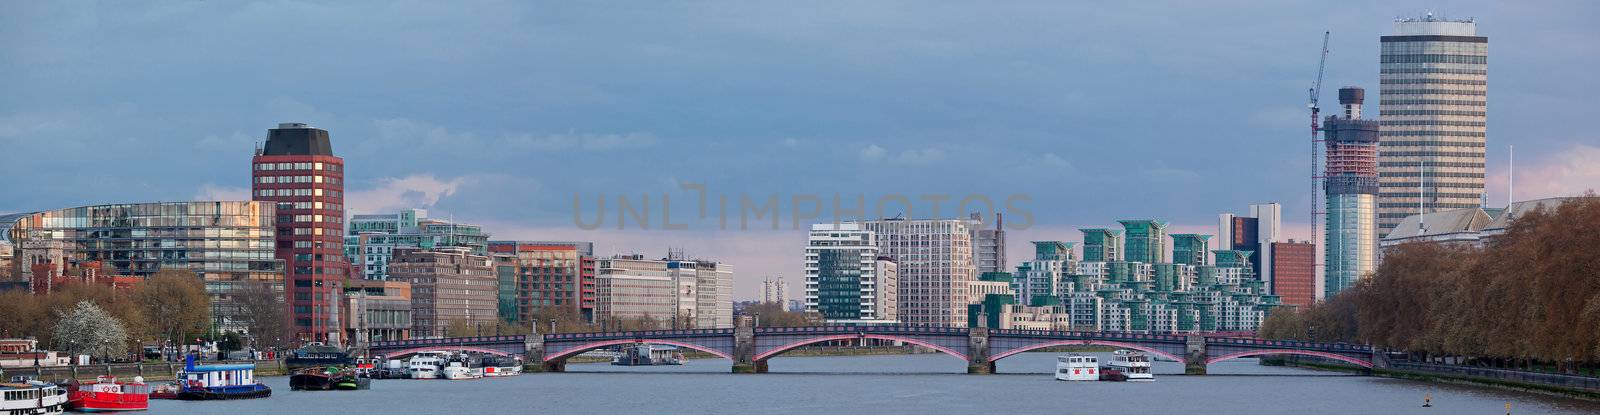 Panorama of London Skylines Skyscrapers along River thames England UK